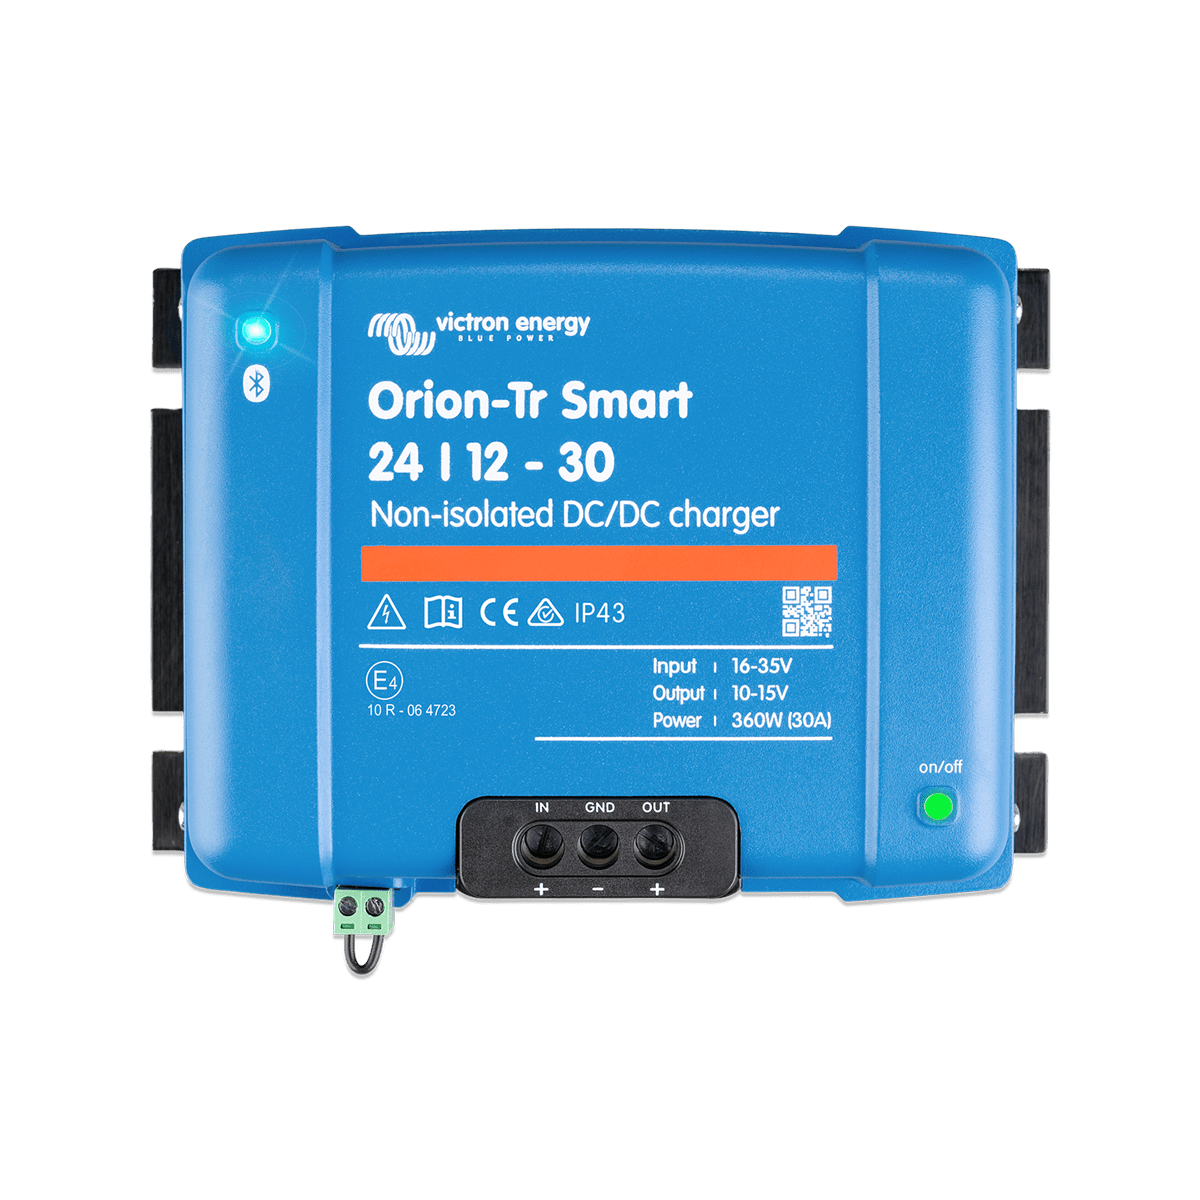 Chargeur DC/DC Orion Smart 24V|12V 30A (360W) non isolé - Pharos Energies